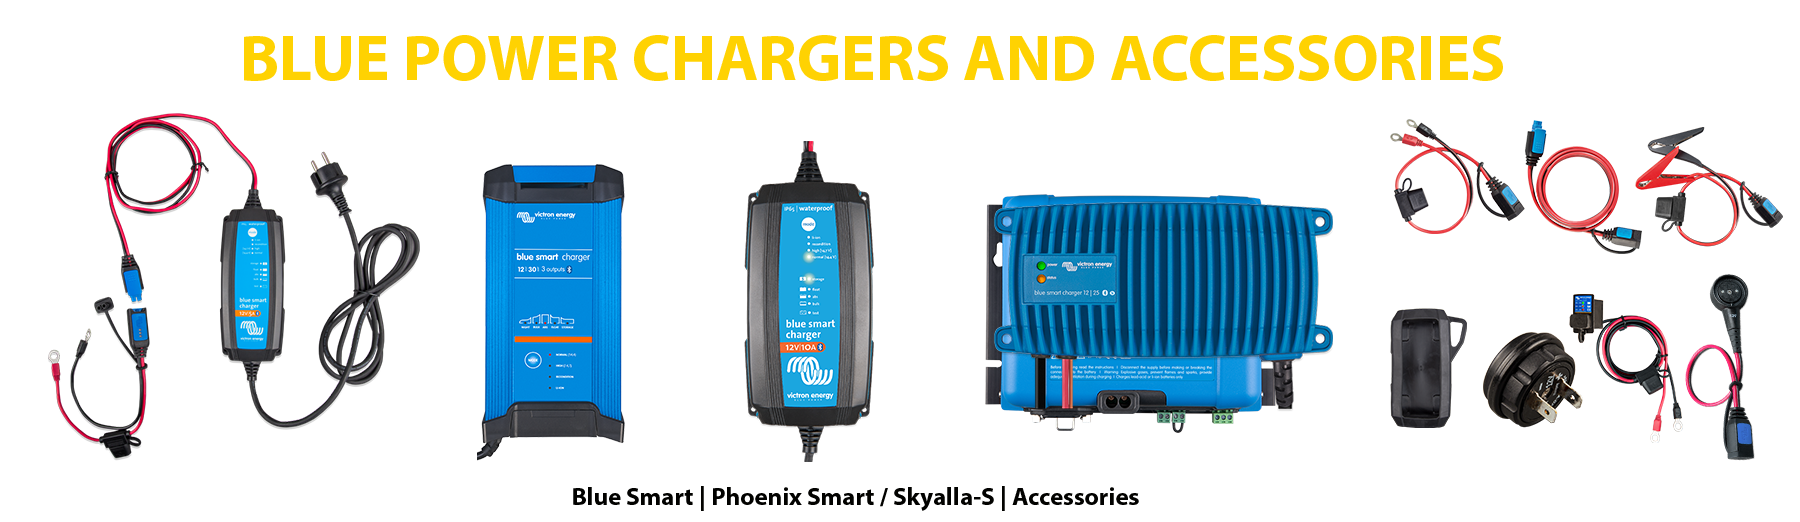 Blue Power Chargers